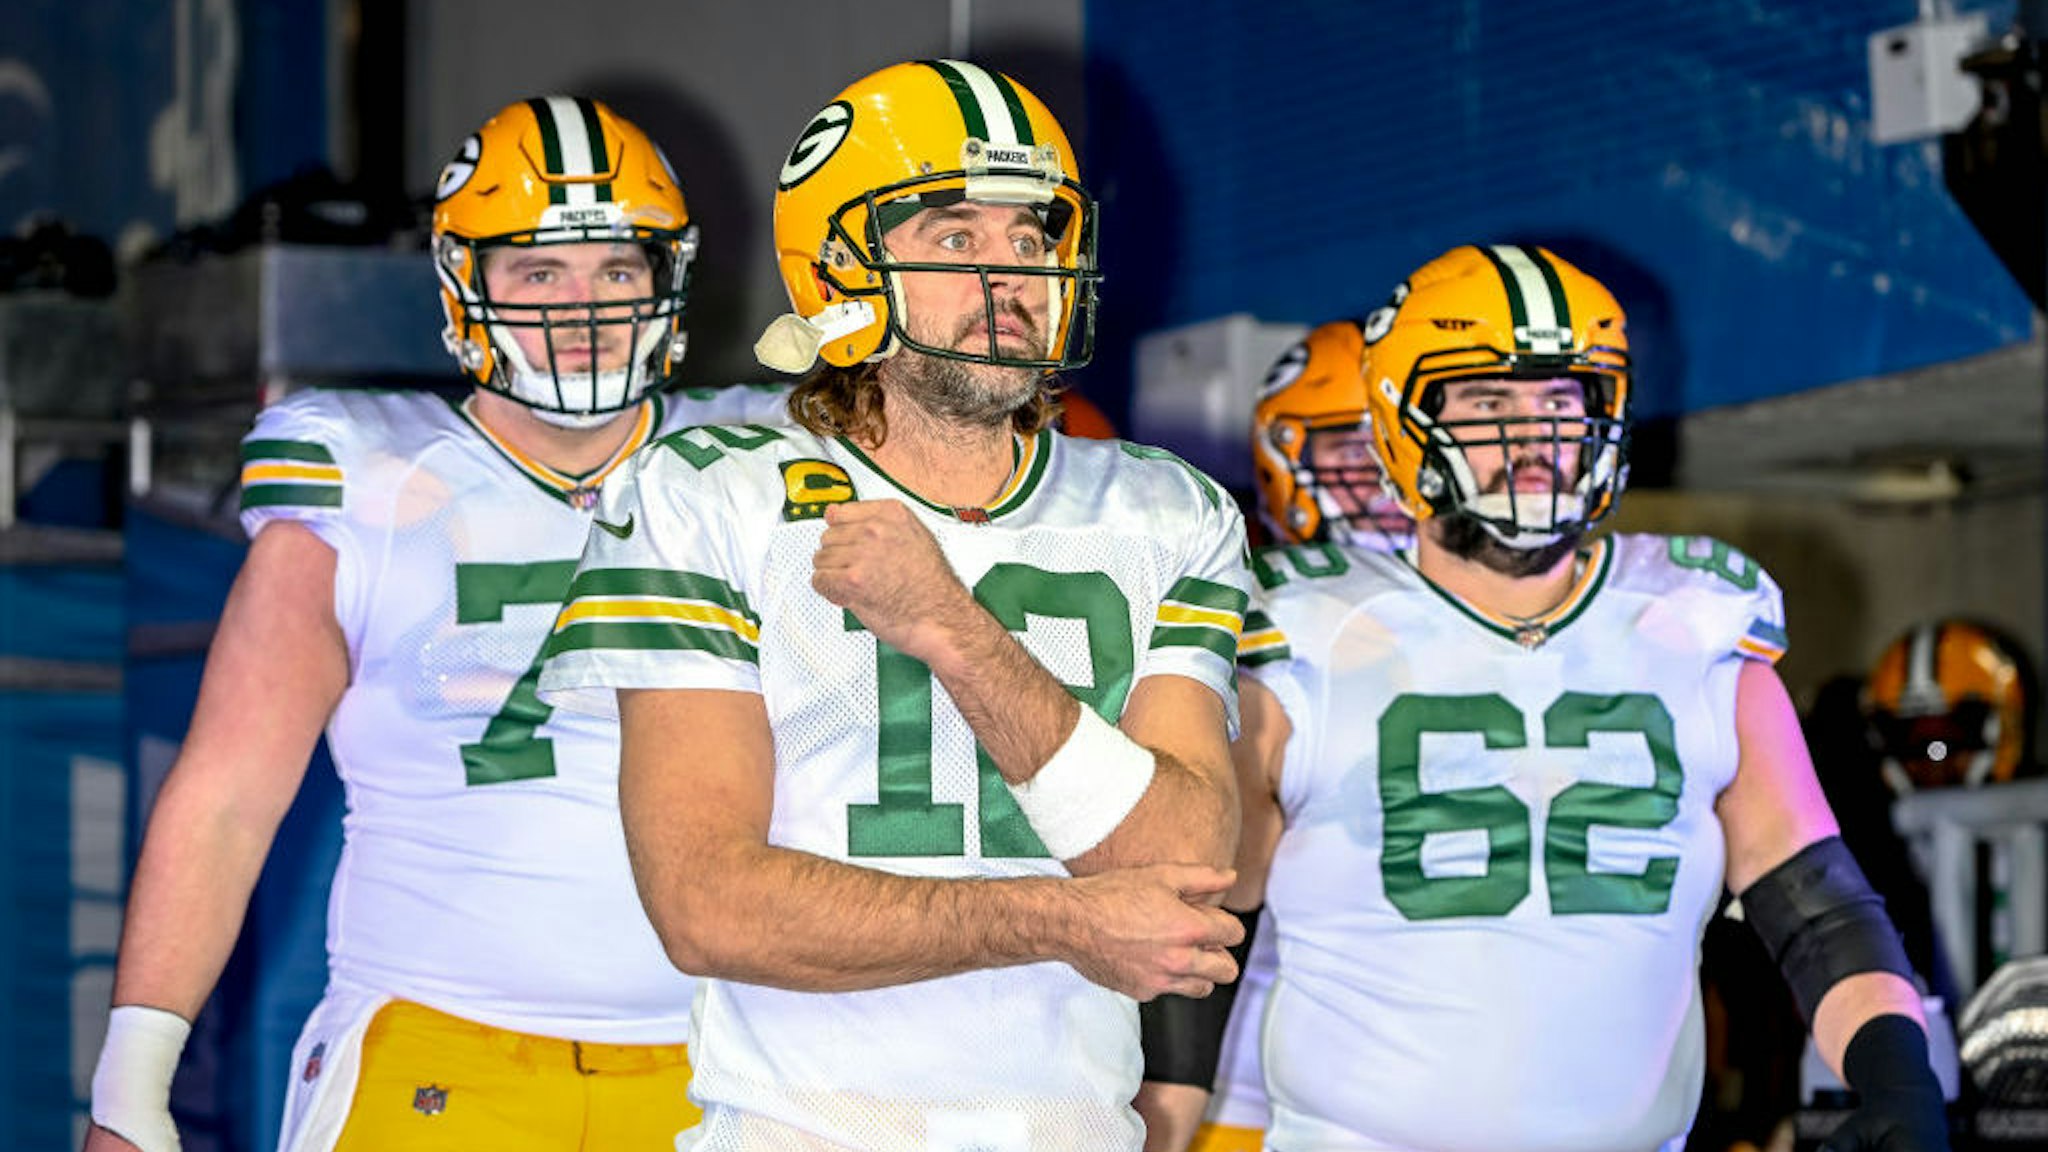 DETROIT, MICHIGAN - JANUARY 09: Aaron Rodgers #12 of the Green Bay Packers leads his team out before the game against the Detroit Lions at Ford Field on January 09, 2022 in Detroit, Michigan. (Photo by Nic Antaya/Getty Images)